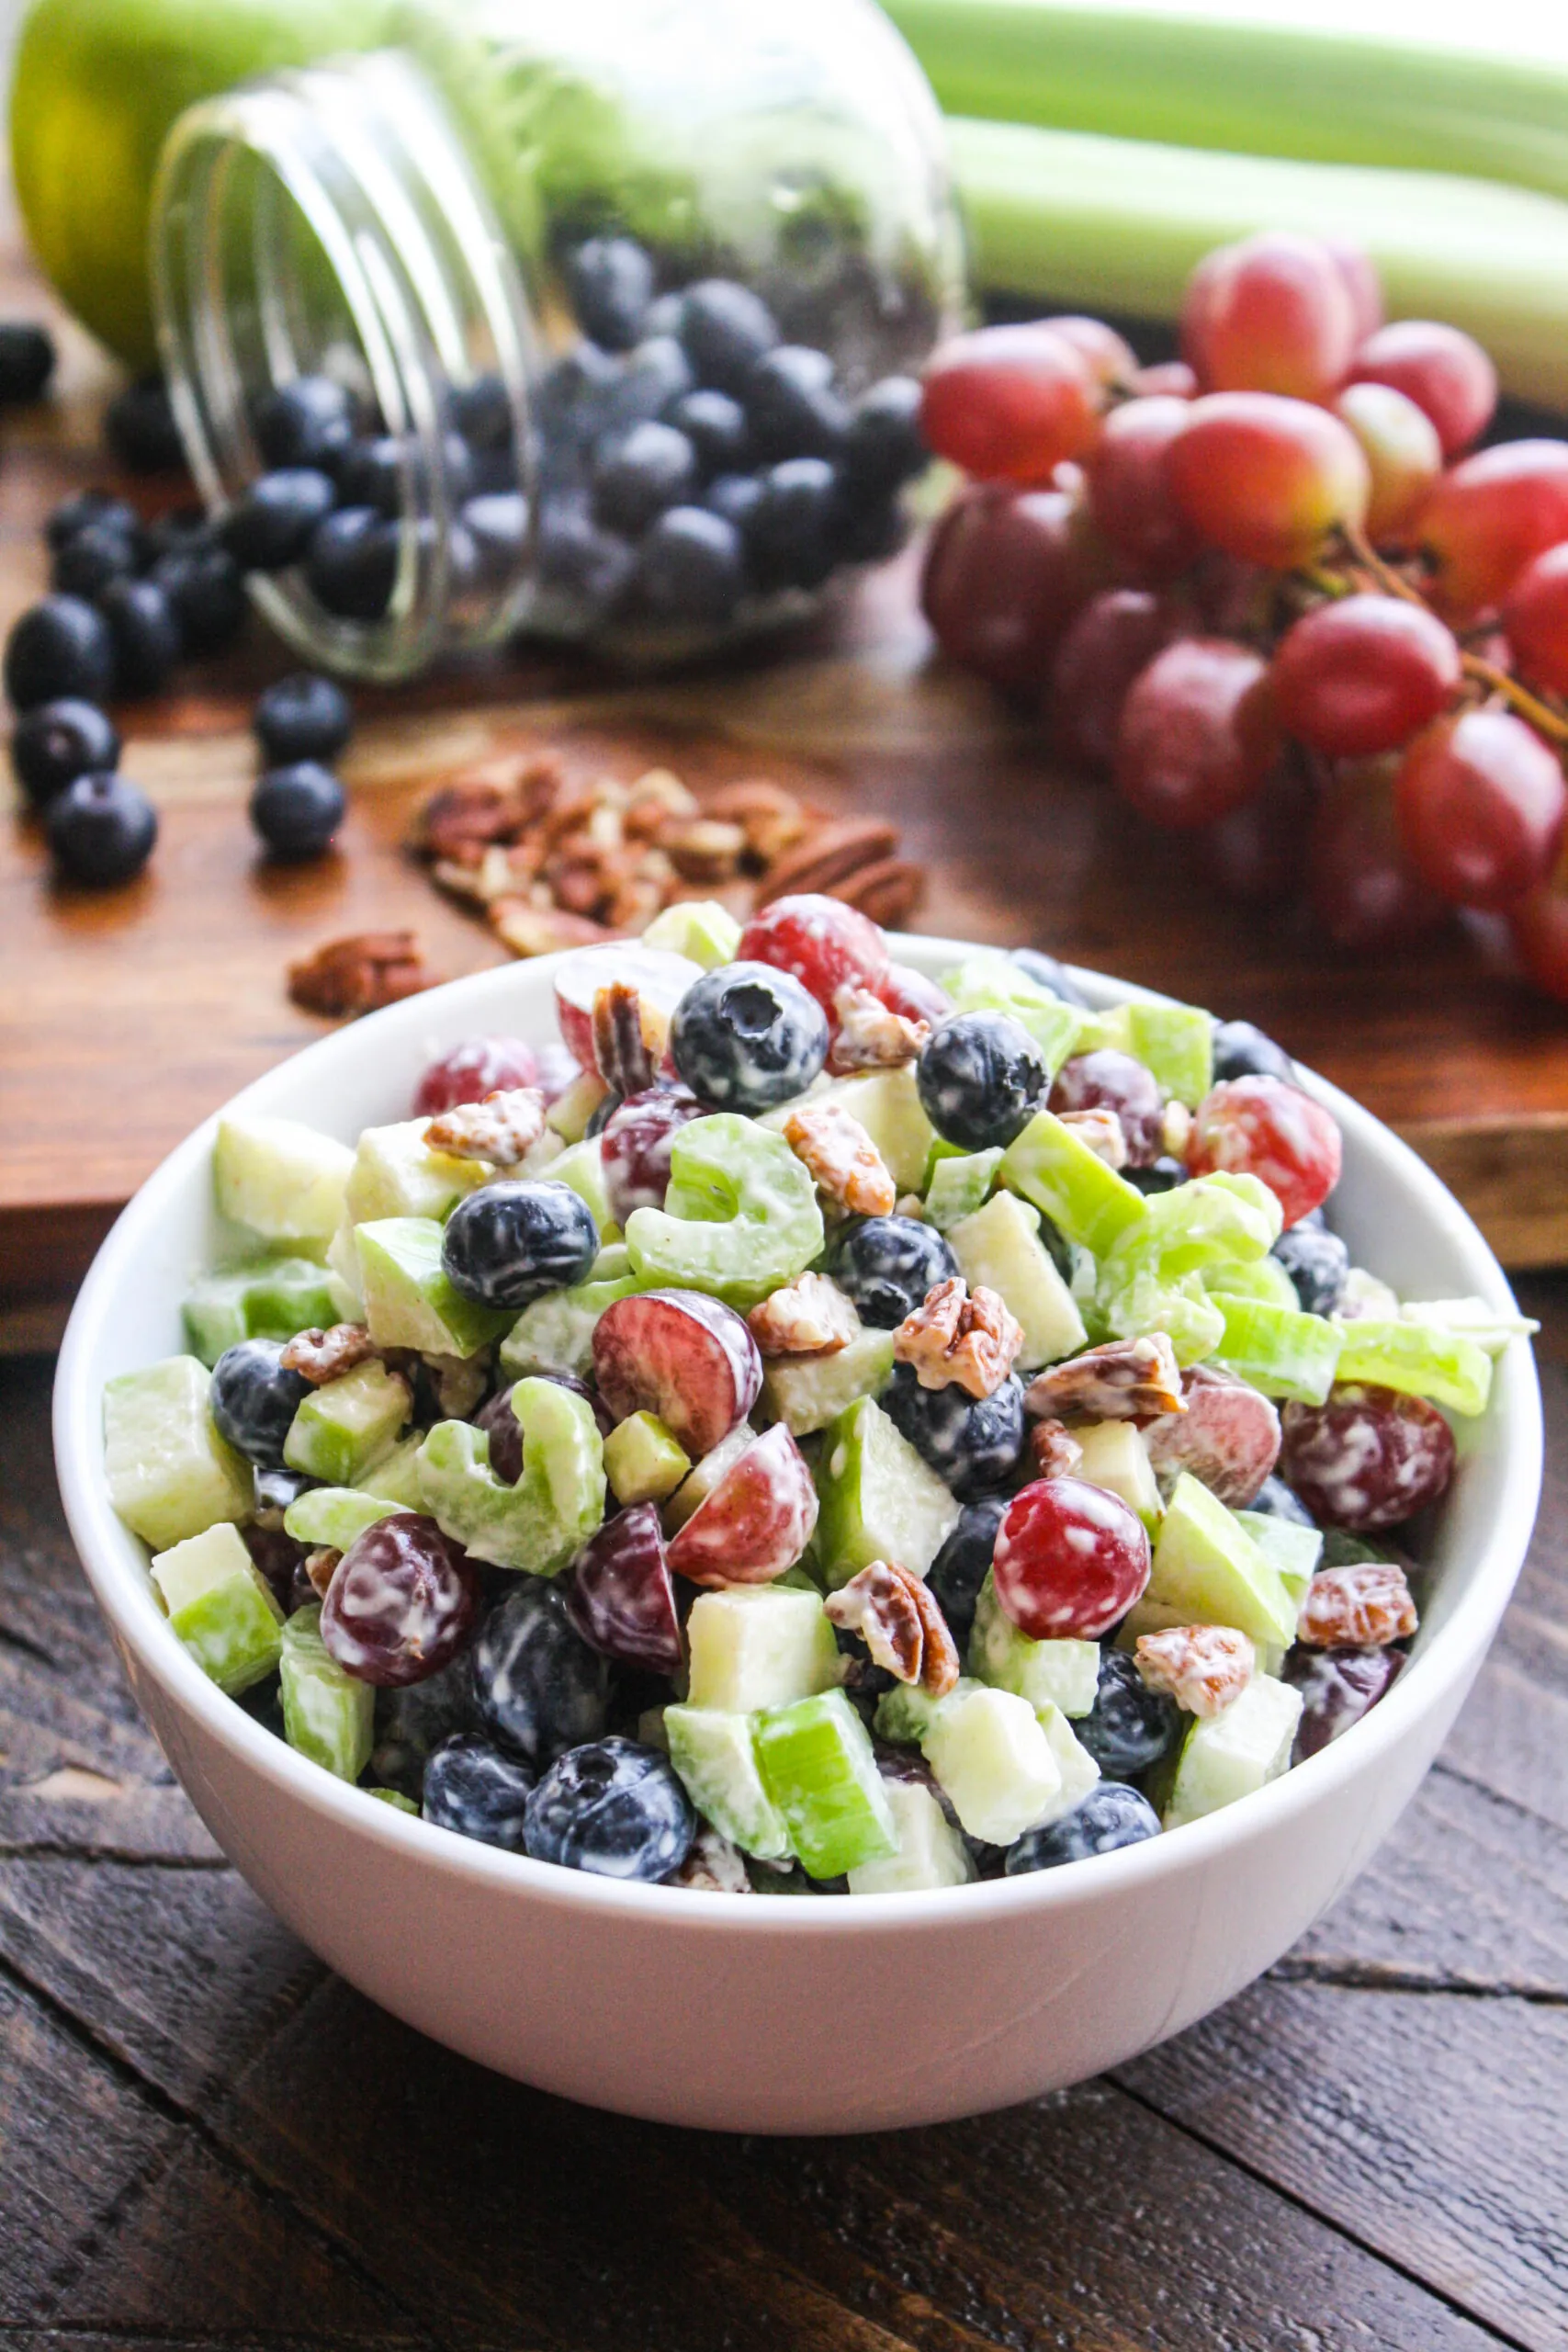 Waldorf salad makes a lovely, crunchy salad for a party or part of a lighter meal.